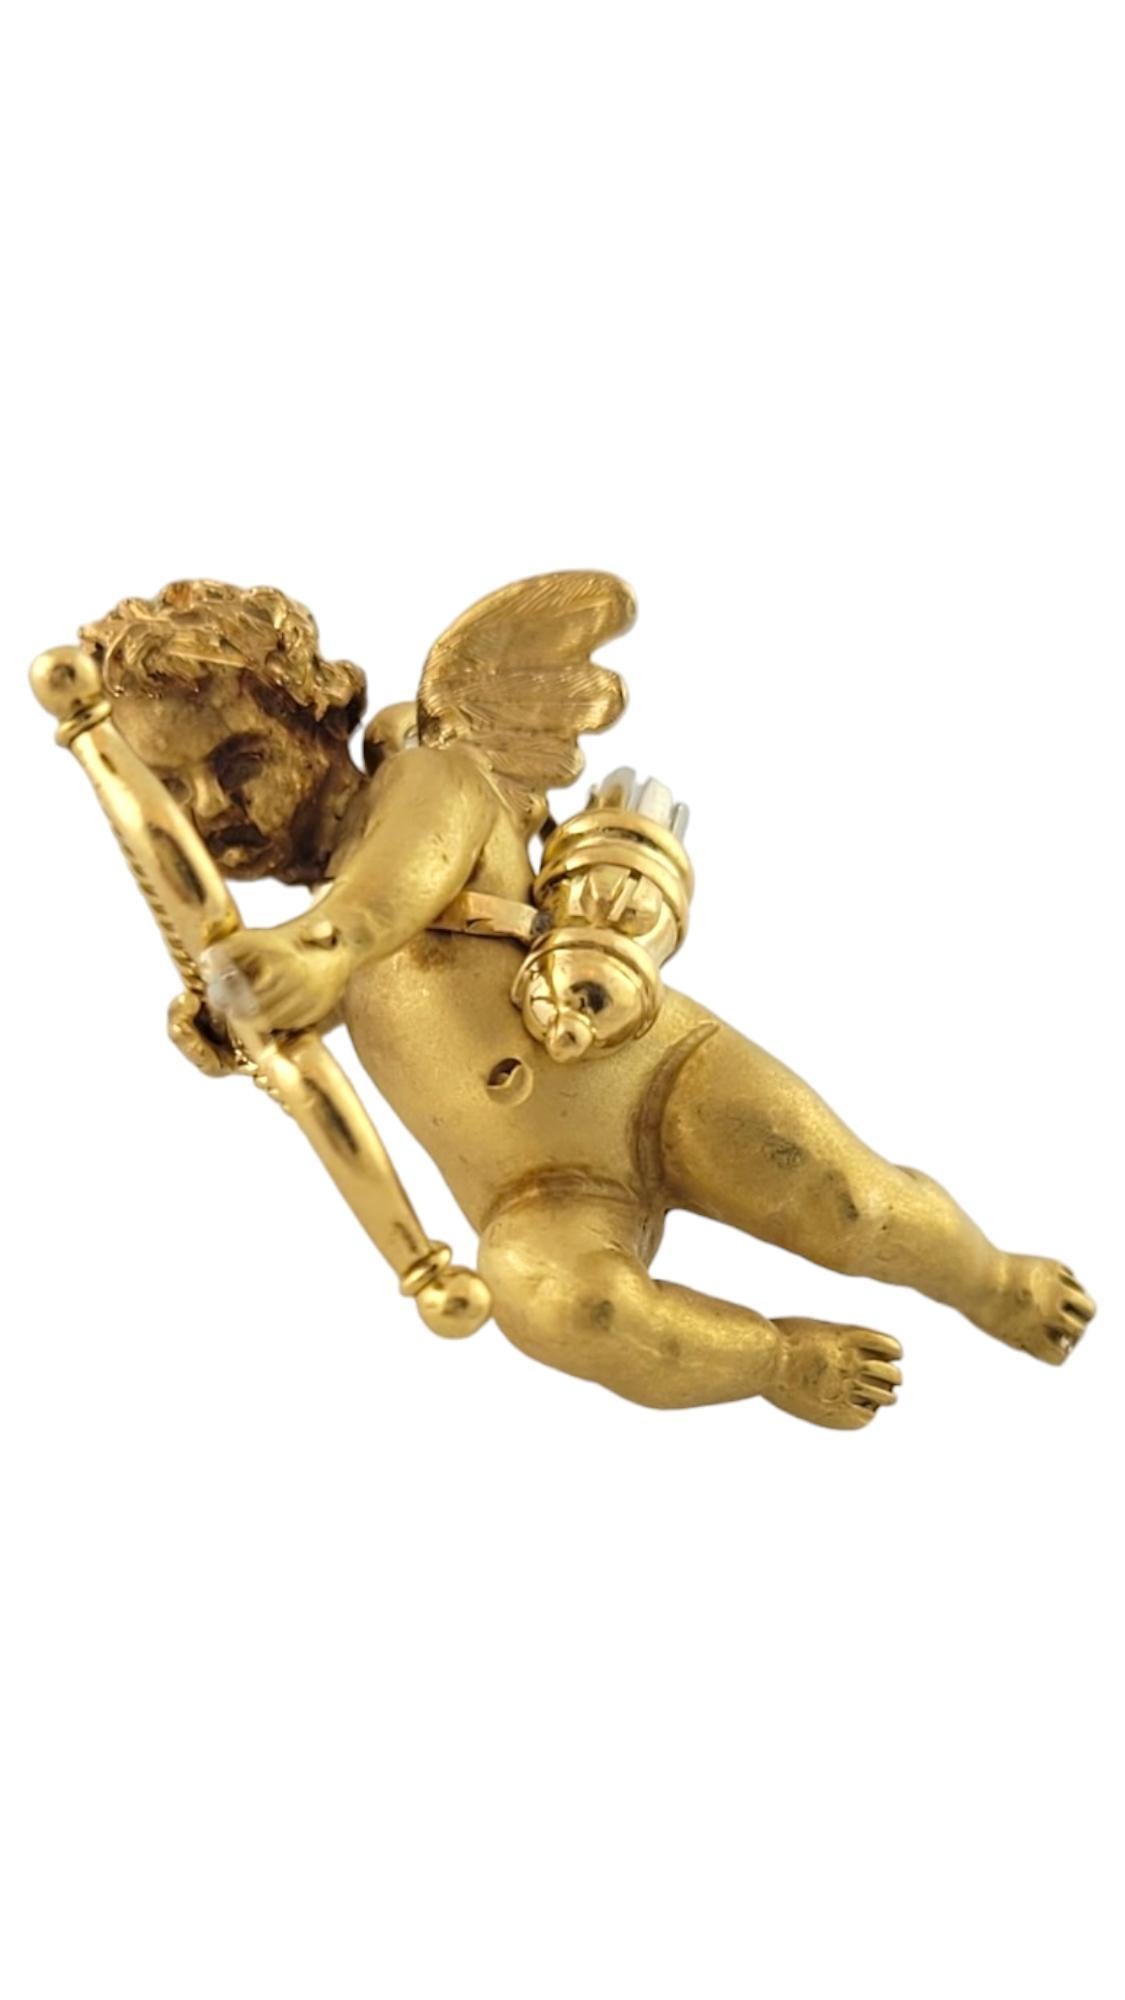 Vintage 18K Yellow & White Gold Cupid Cherub Charm

This gorgeous, handmade cupid cherub charm is meticulously crafted from 18K yellow gold with exquisite detailing and 18K white gold arrows!

Size: 29.28mm X 22.56mm X 15.80mm

Weight: 8.93 dwt/